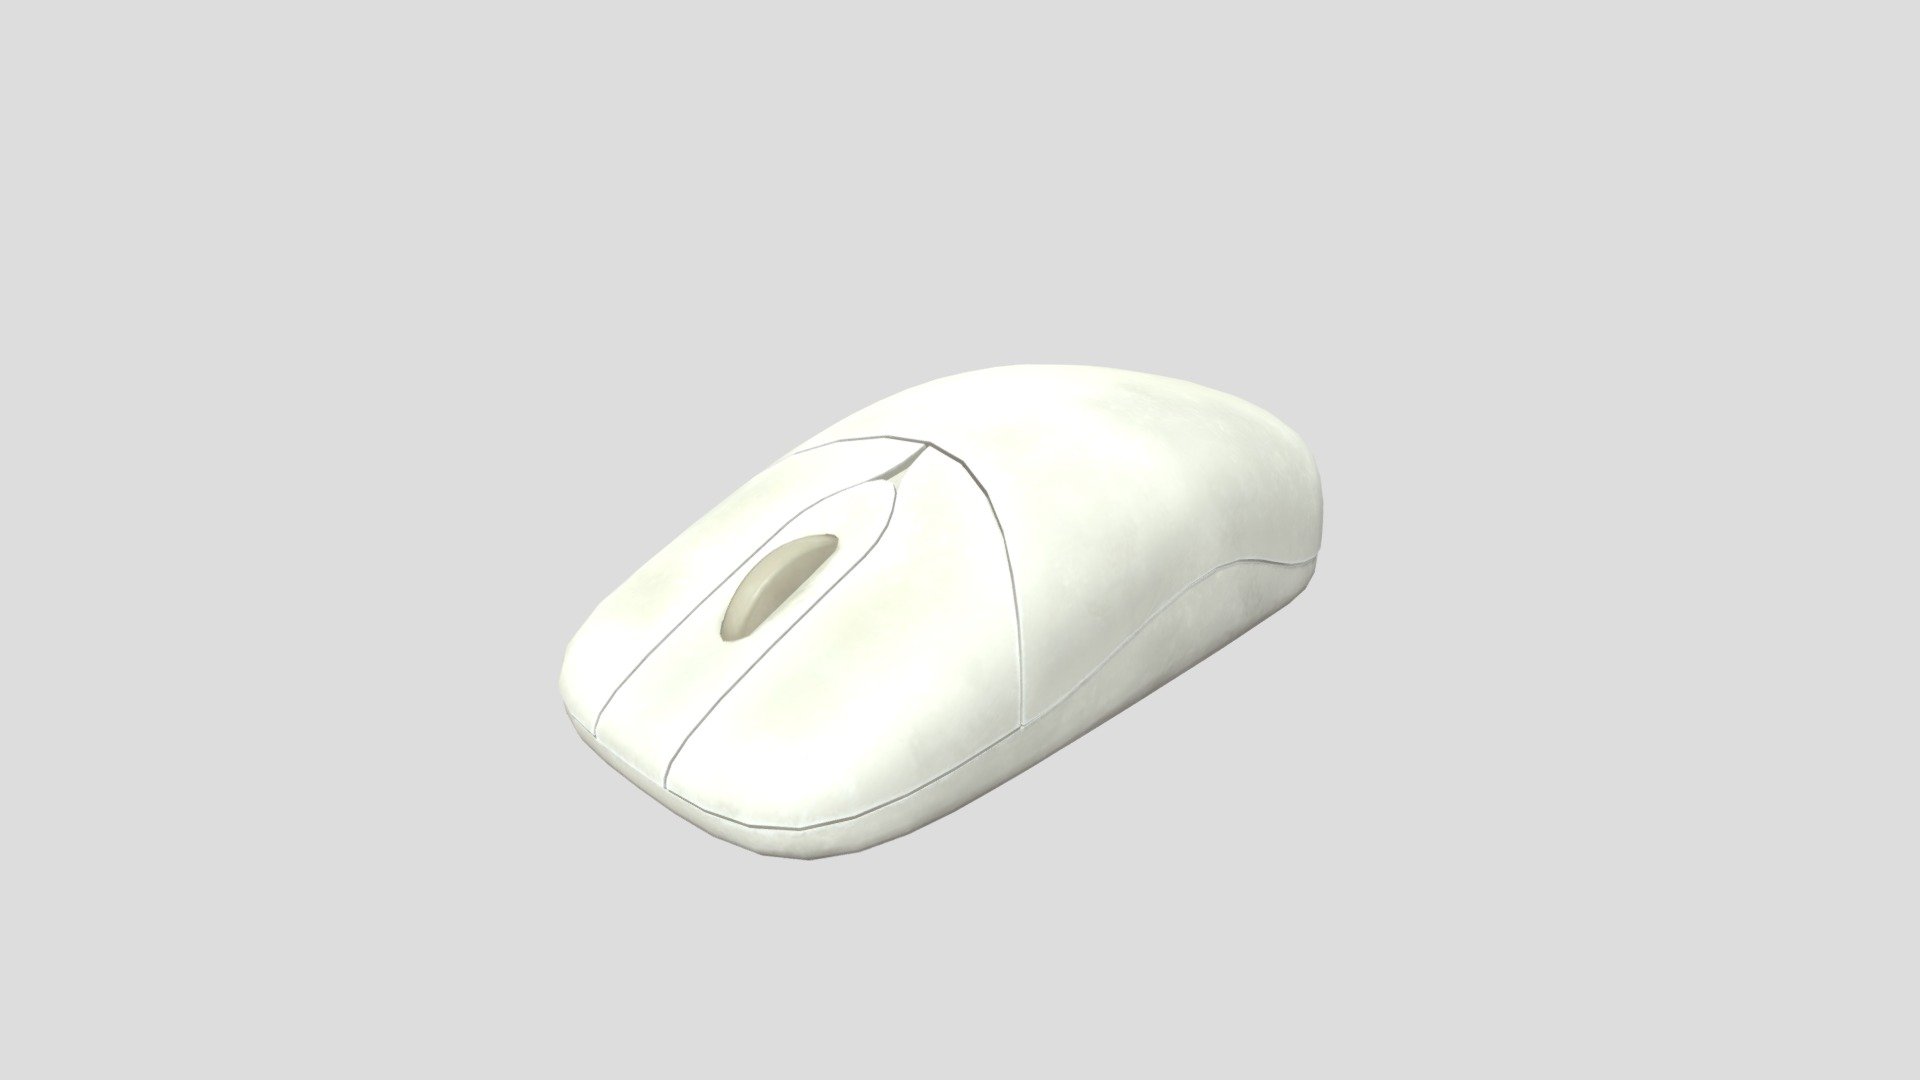 This Retro Mouse is perfect for any office or workspace and the model is viewable from all angles and distances.

This Includes:

The mesh
2K and 1K Texture Set ( Albedo, Metallic, Roughness, Nroaml, Height)
The mesh is UV Unwrapped with vertex colors for easy retexturing 3d model